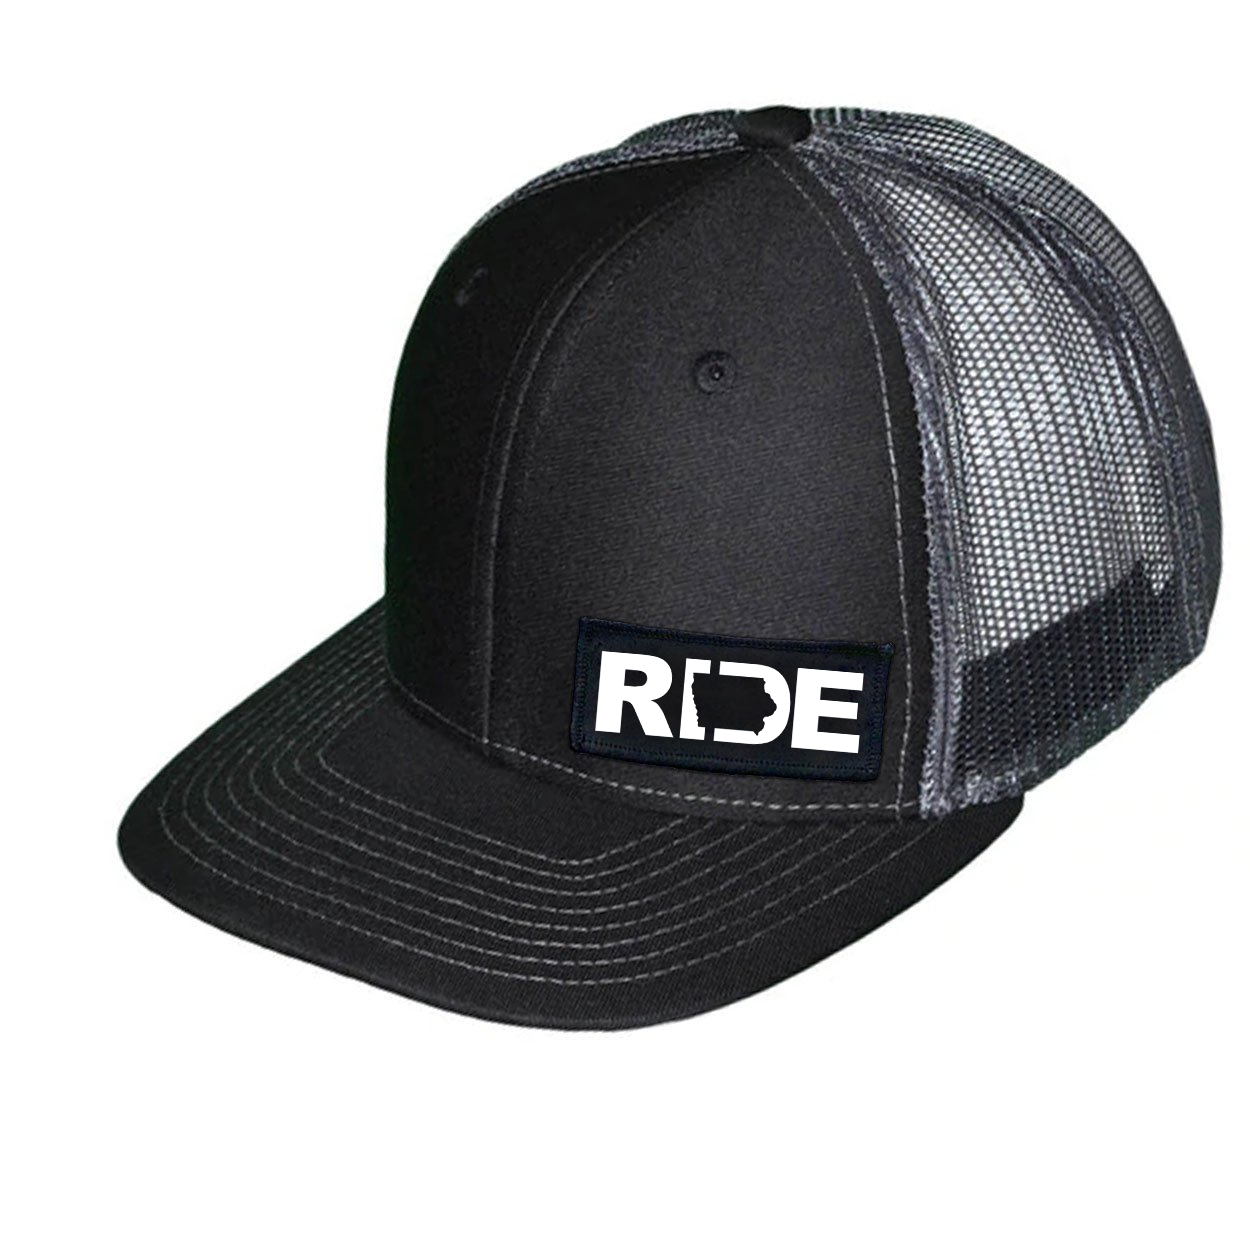 Ride Iowa Night Out Pro Embroidered Snapback Trucker Hat Black/Gray